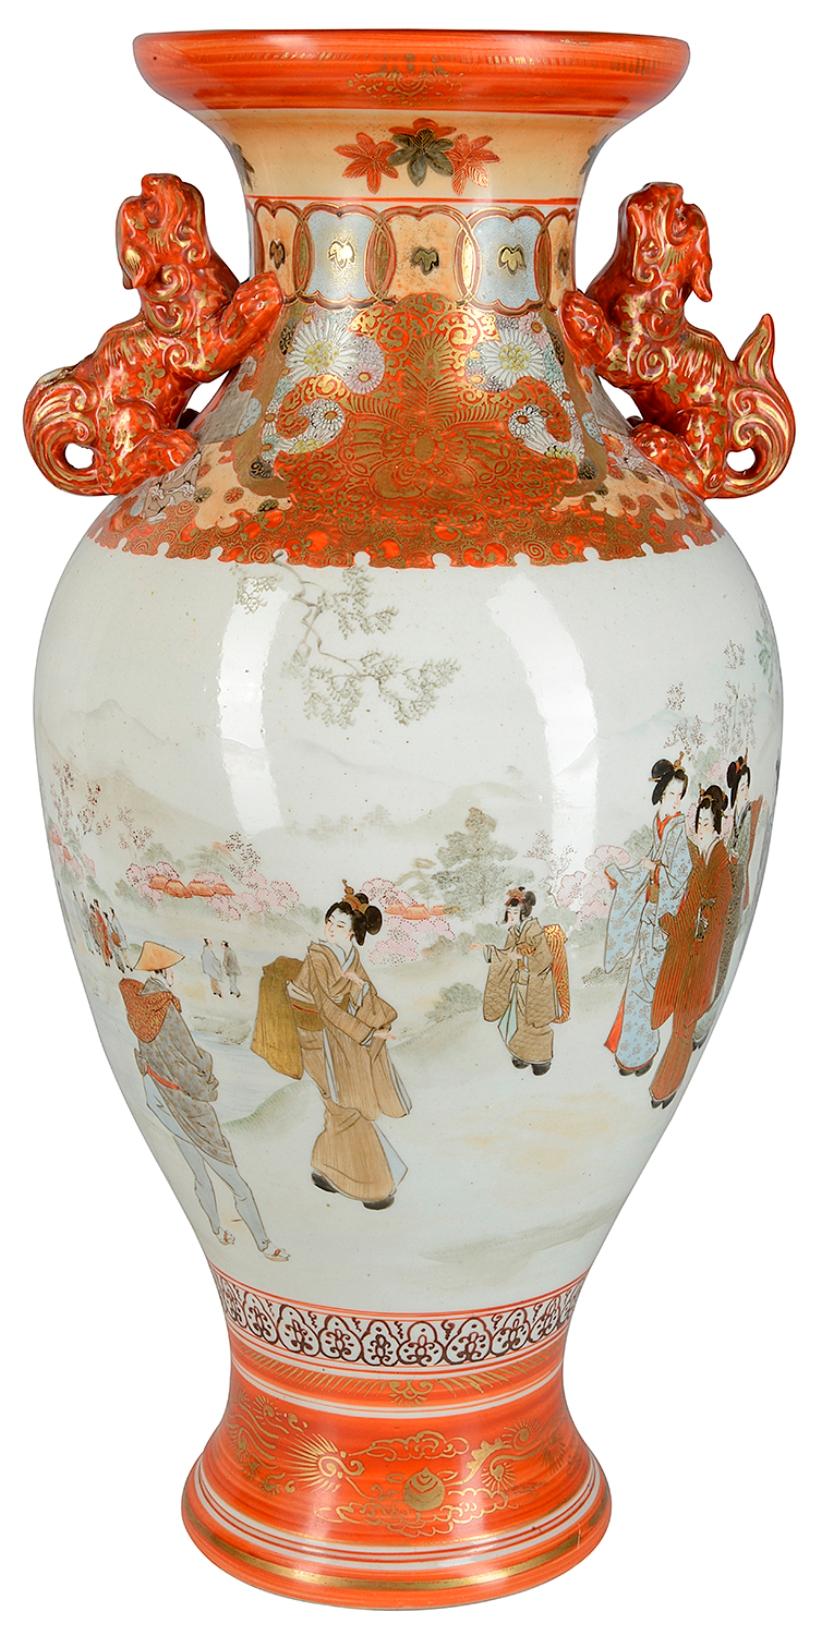 A good quality late 19th century Japanese Kutani vase, having the classical orange ground, dog of faux handles to either side, classical motif decoration, with scenes depicting Geigha girls outside amongst men women and children.
We can have this